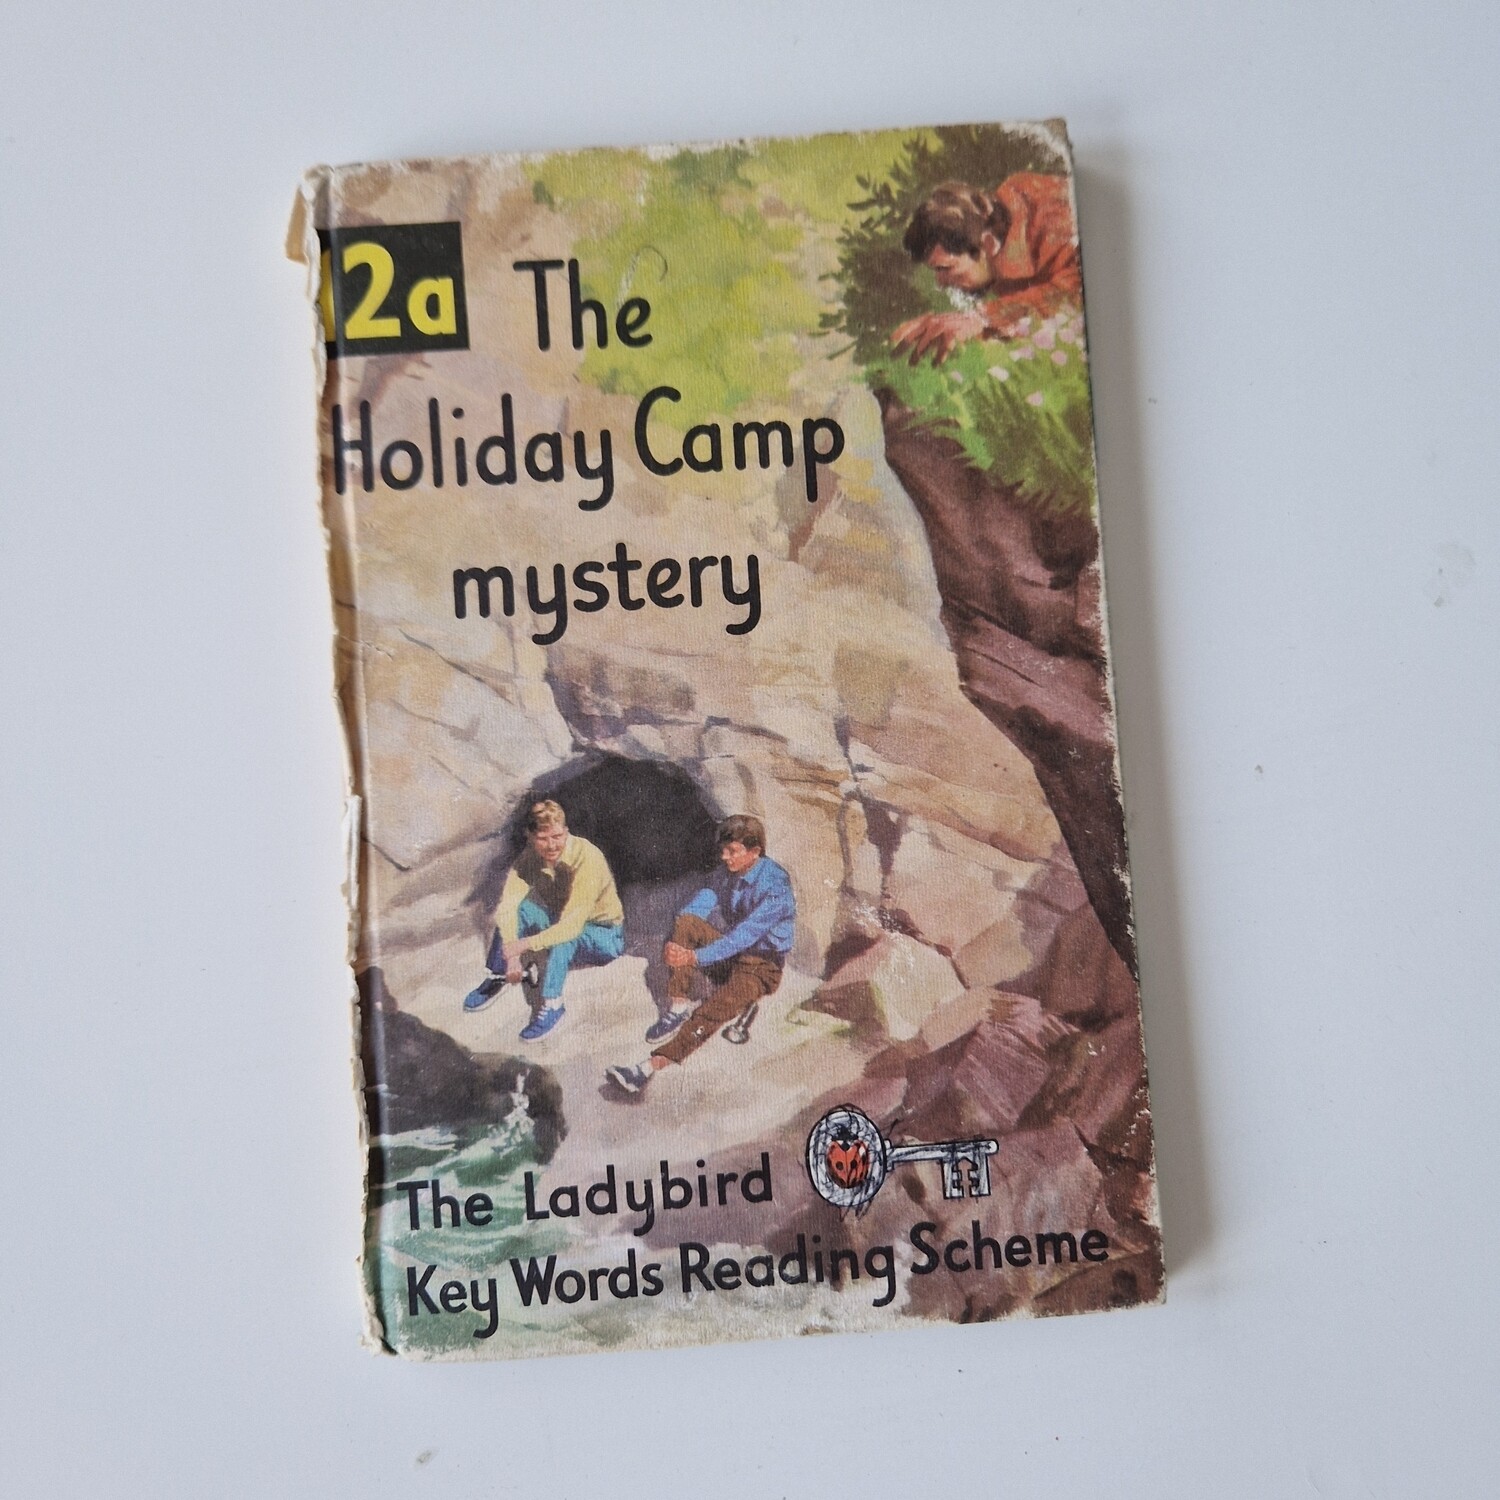 The Holiday Camp Mystery - Peter & Jane Notebook - Ladybird book